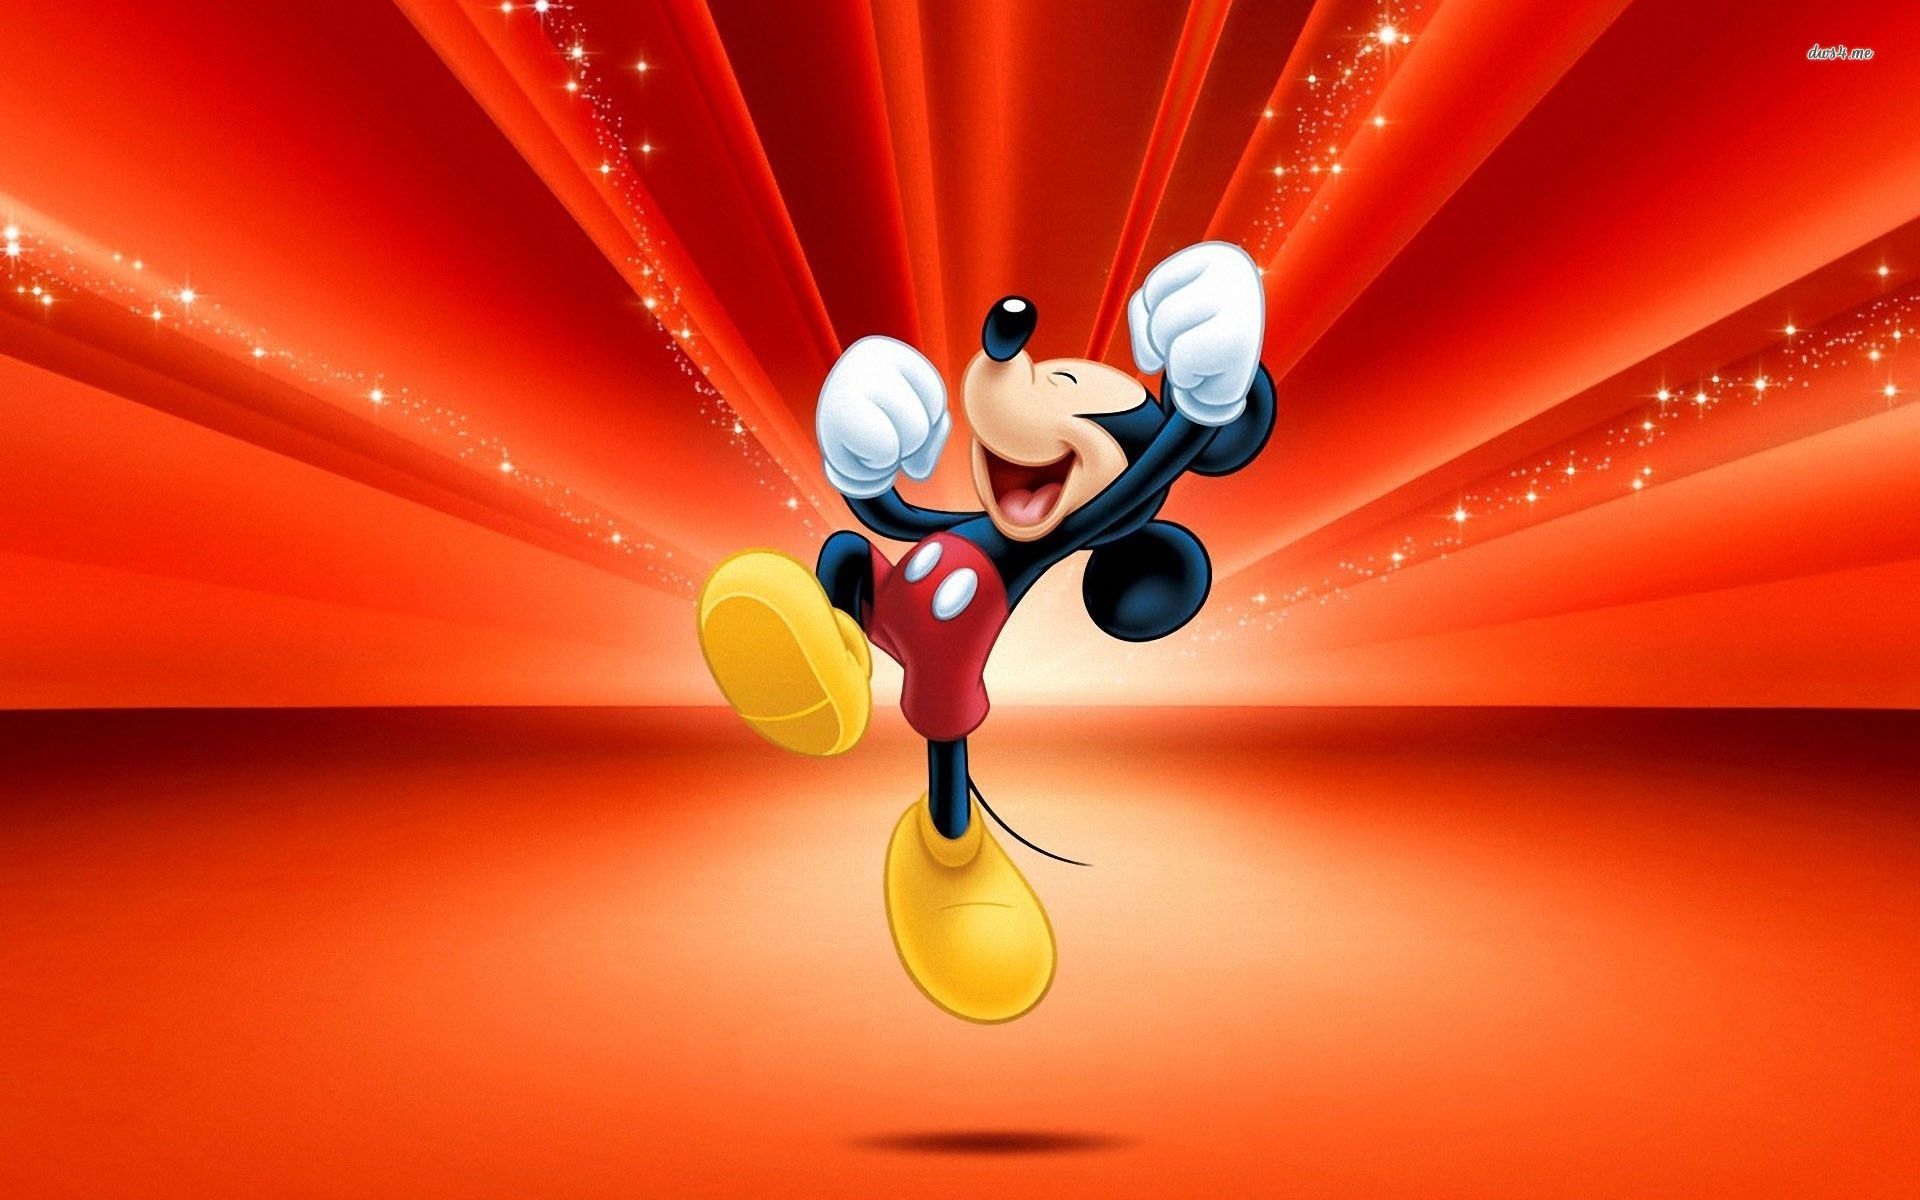 Mickey Mouse wallpaper - Cartoon wallpapers - #19423